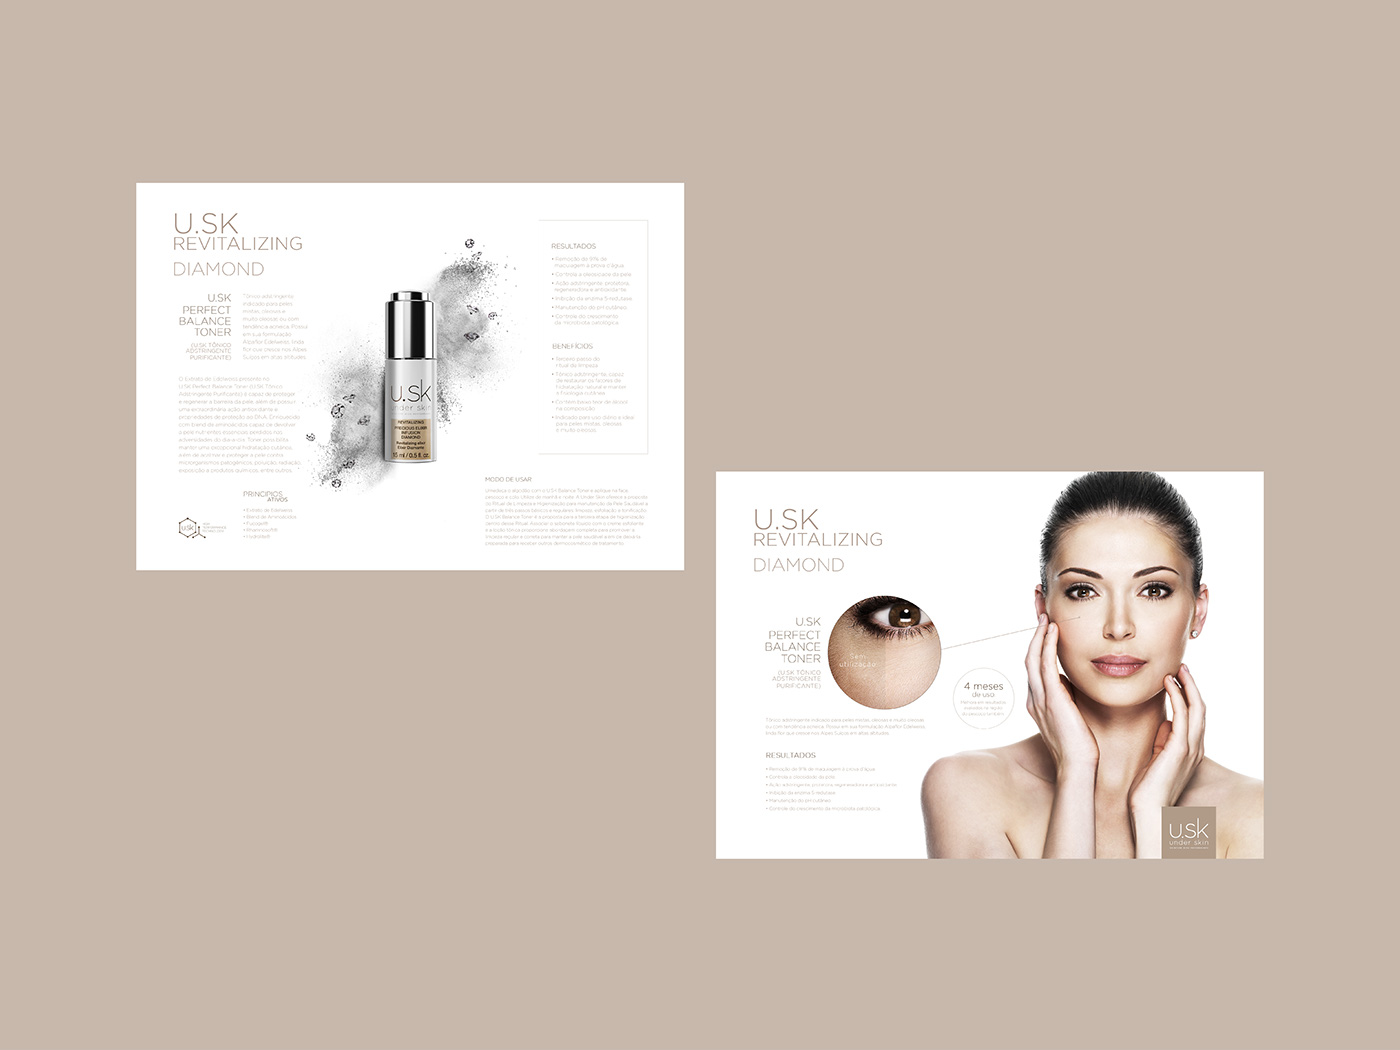 cosmetics beauty medical science care skin manipulation photoshop woman Advertising 